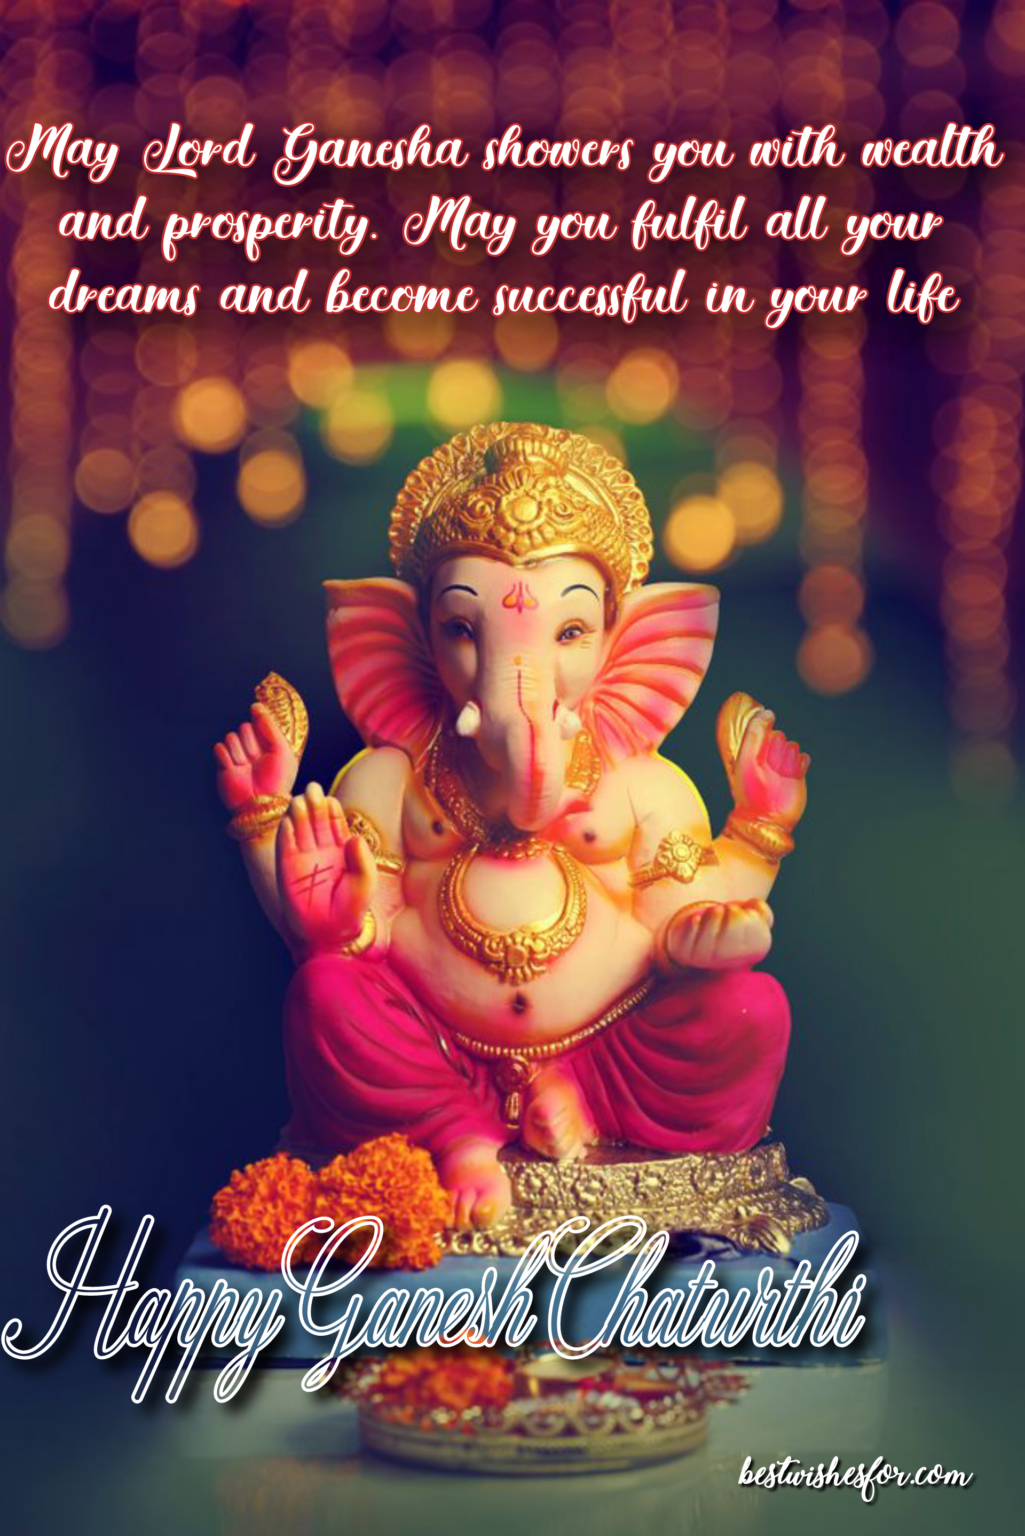 Happy Ganesh Chaturthi 2021 Wishes Quotes Images Messages And Sayings Best Wishes 8311